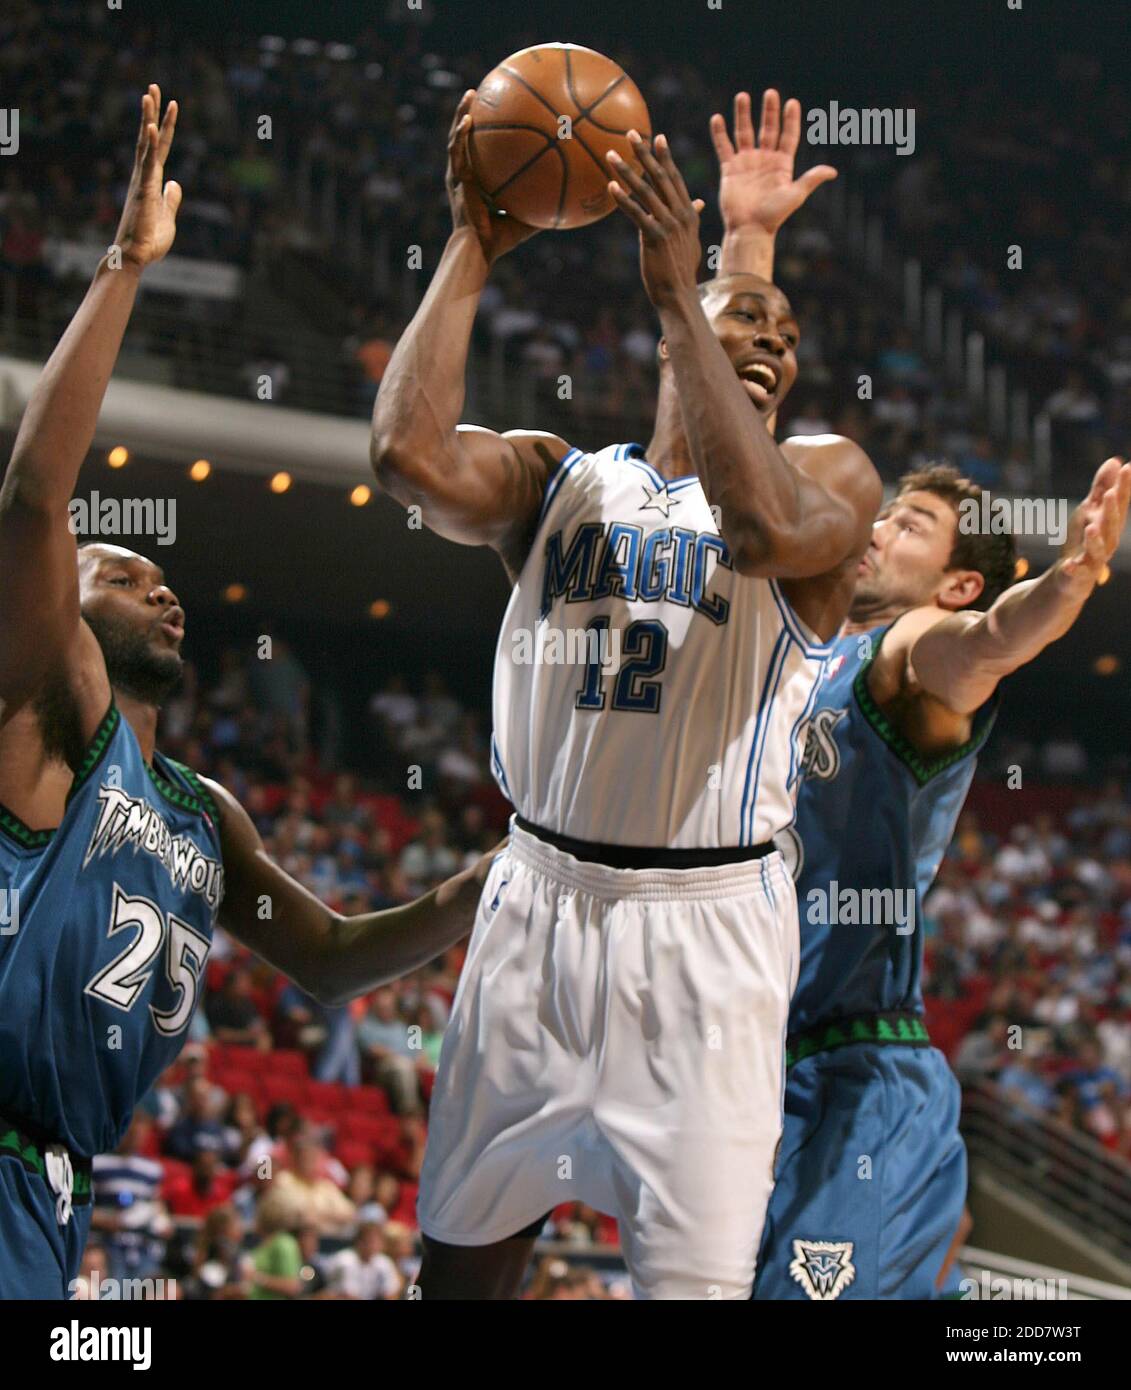 NO FILM, NO VIDEO, NO TV, NO DOCUMENTARY - Orlando Magic center Dwight Howard handles the ball among Minnesota Timberwolves defenders including center Al Jefferson, left, at Amway Arena in Orlando, FL, USA on April 11, 2008. Photo by Stephen M. Dowell/Orlando Sentinel/MCT/Cameleon/ABACAPRESS.COM Stock Photo